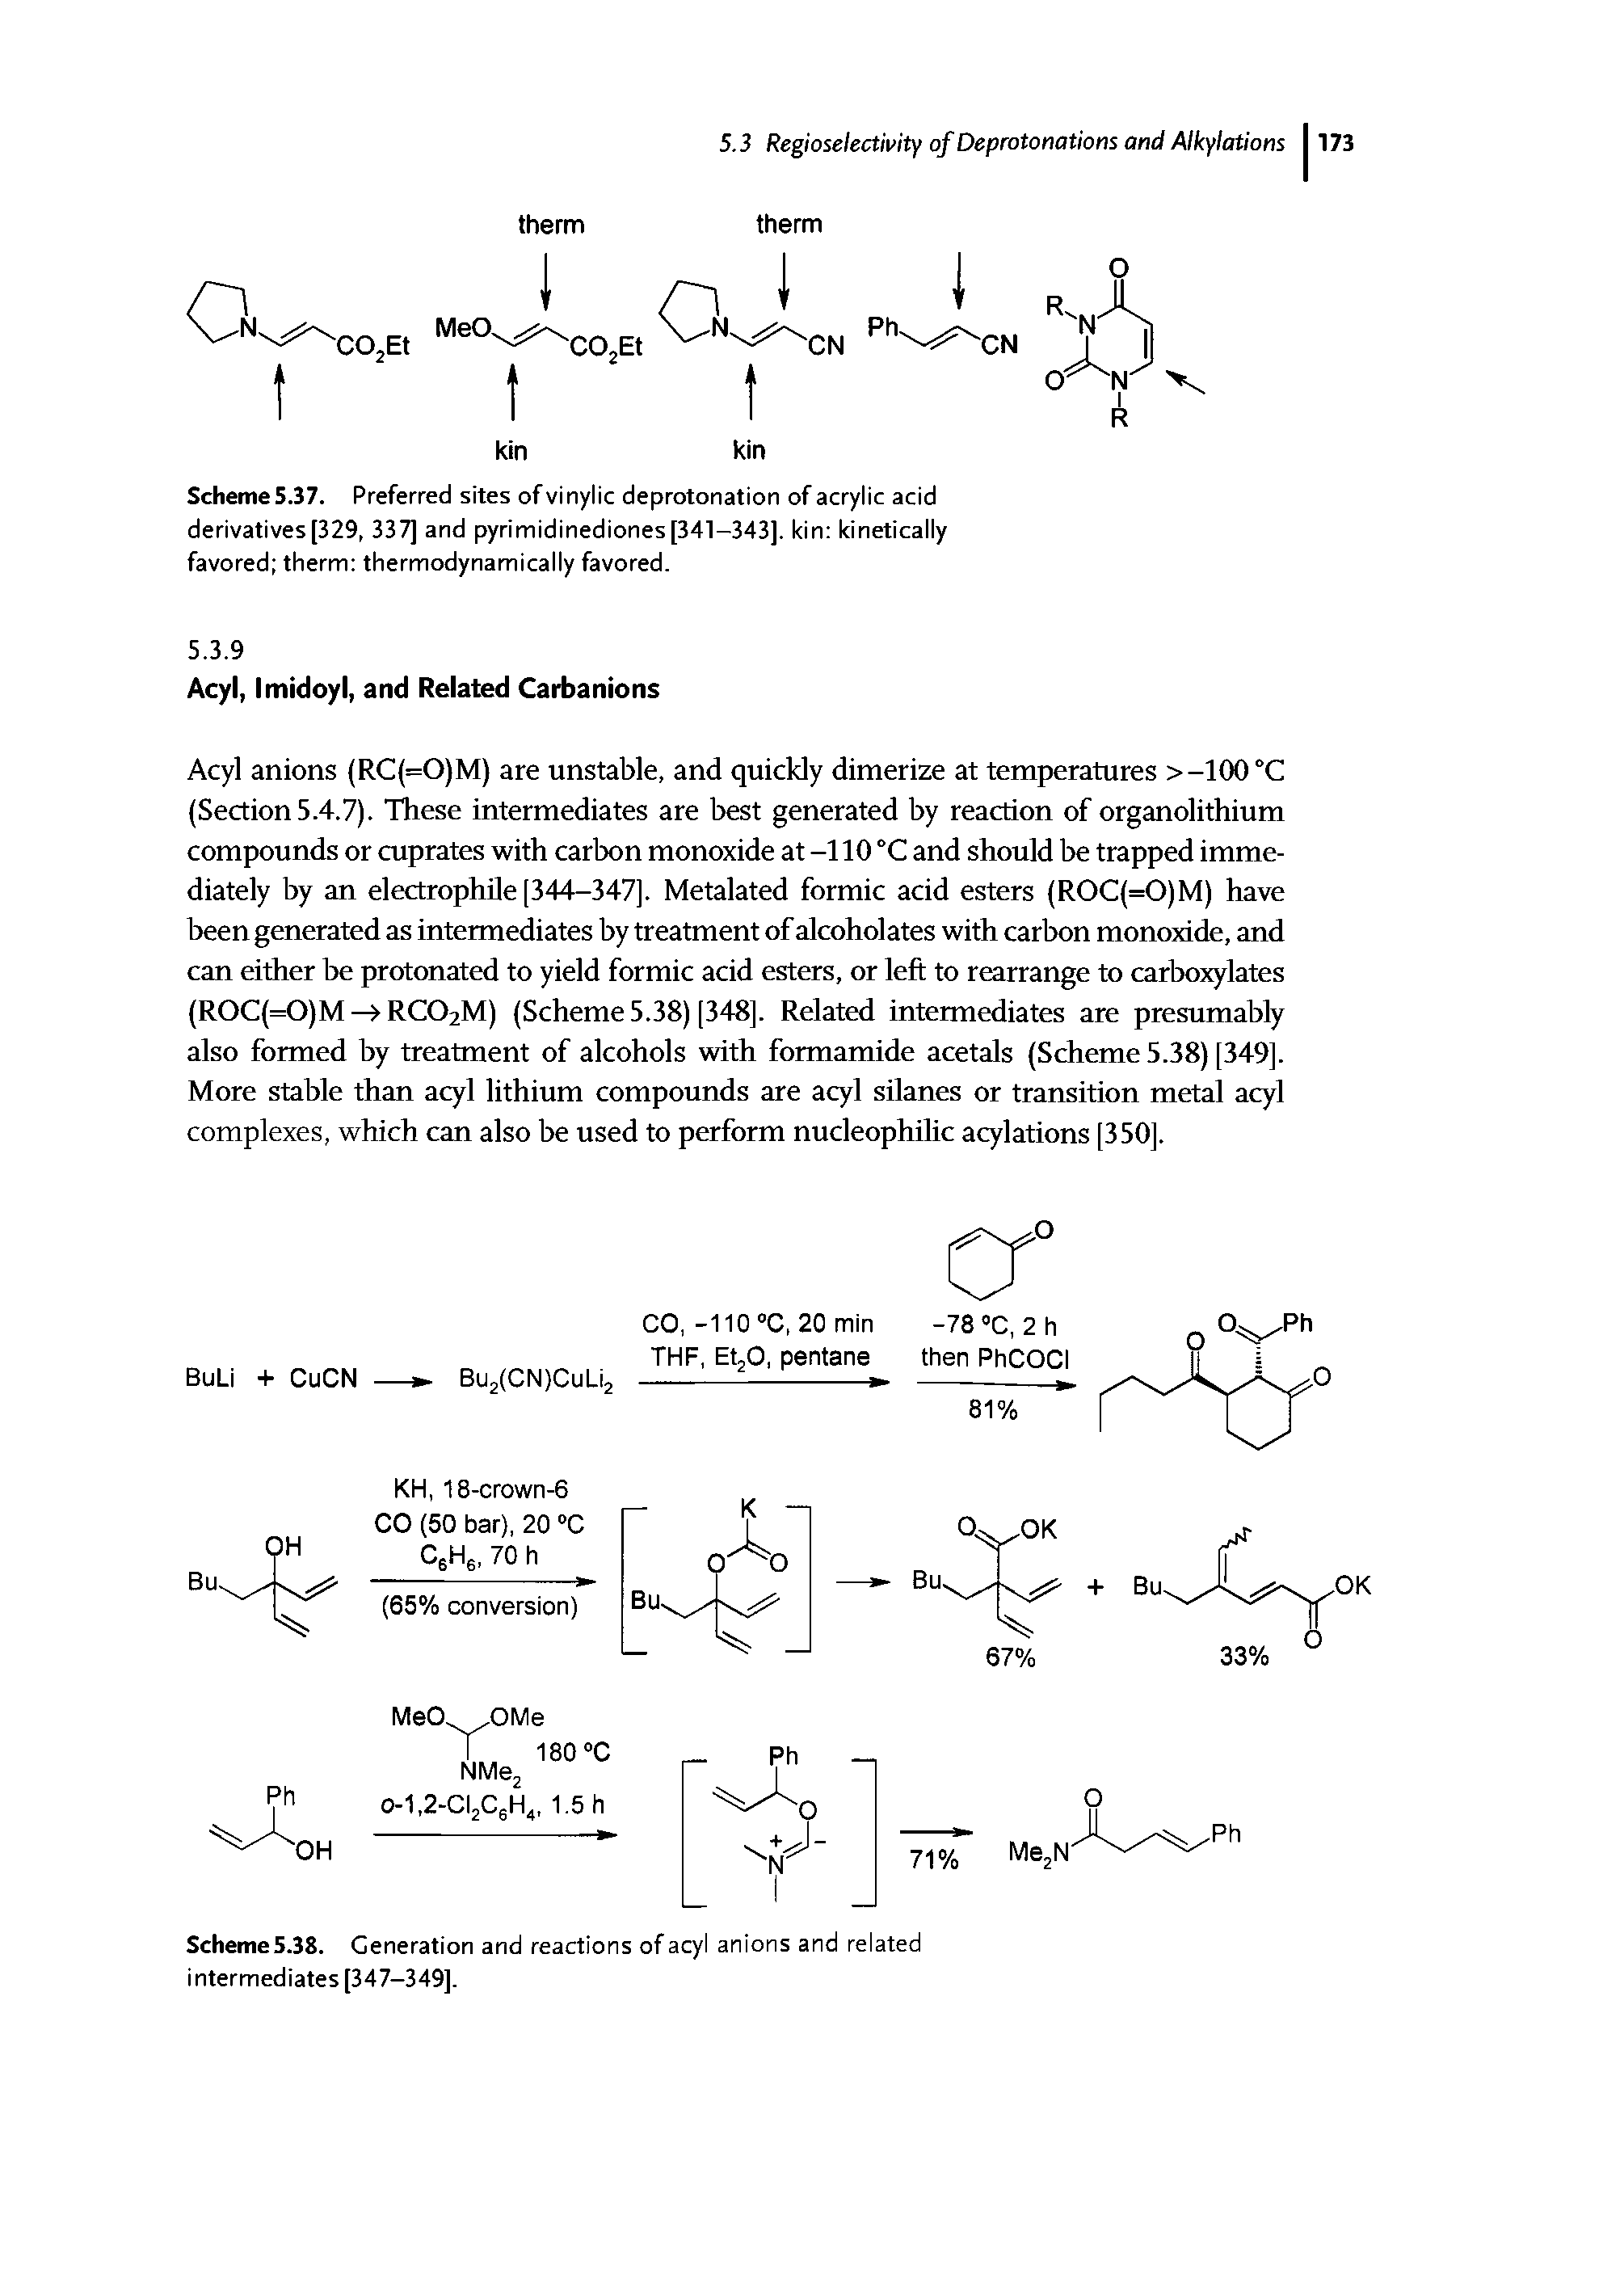 Scheme5.37. Preferred sites of vinylic deprotonation of acrylic acid derivatives[329, 337] and pyrimidinediones[341-343]. kin kinetically favored therm thermodynamically favored.